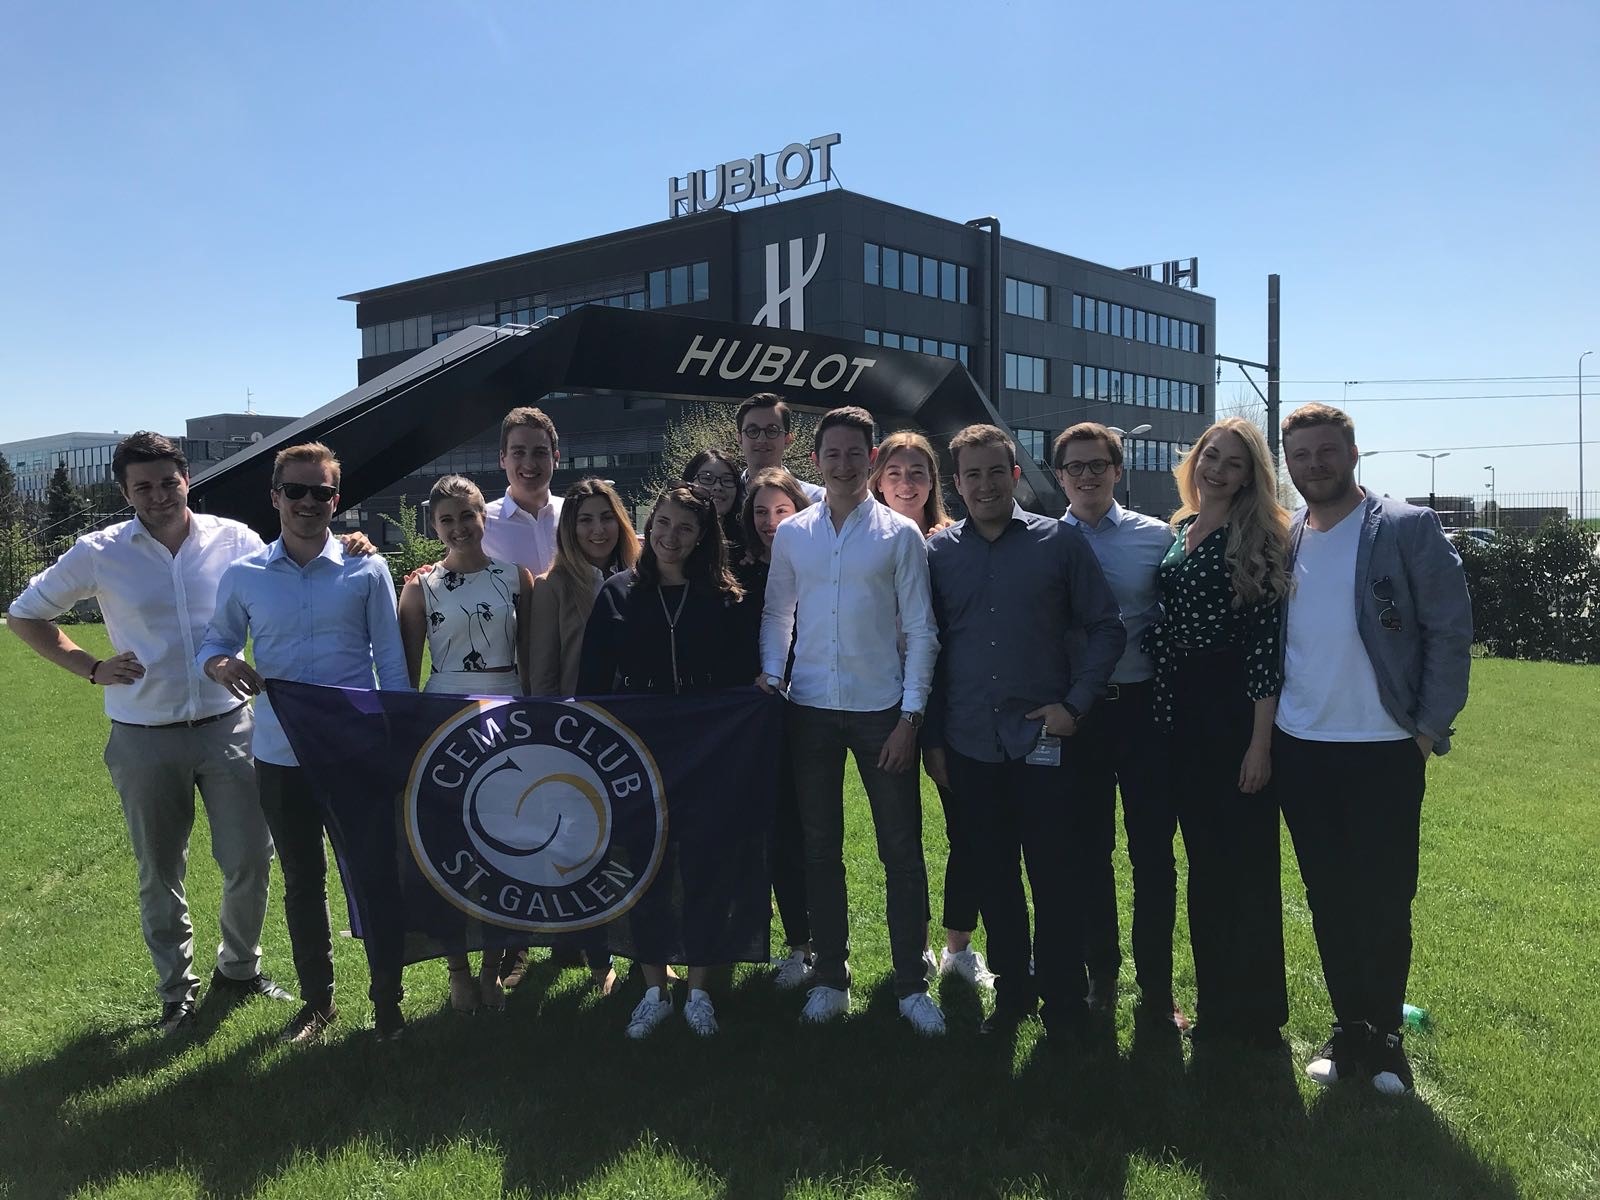 Group picture at Hublot headquarters in Nyon, Switzerland